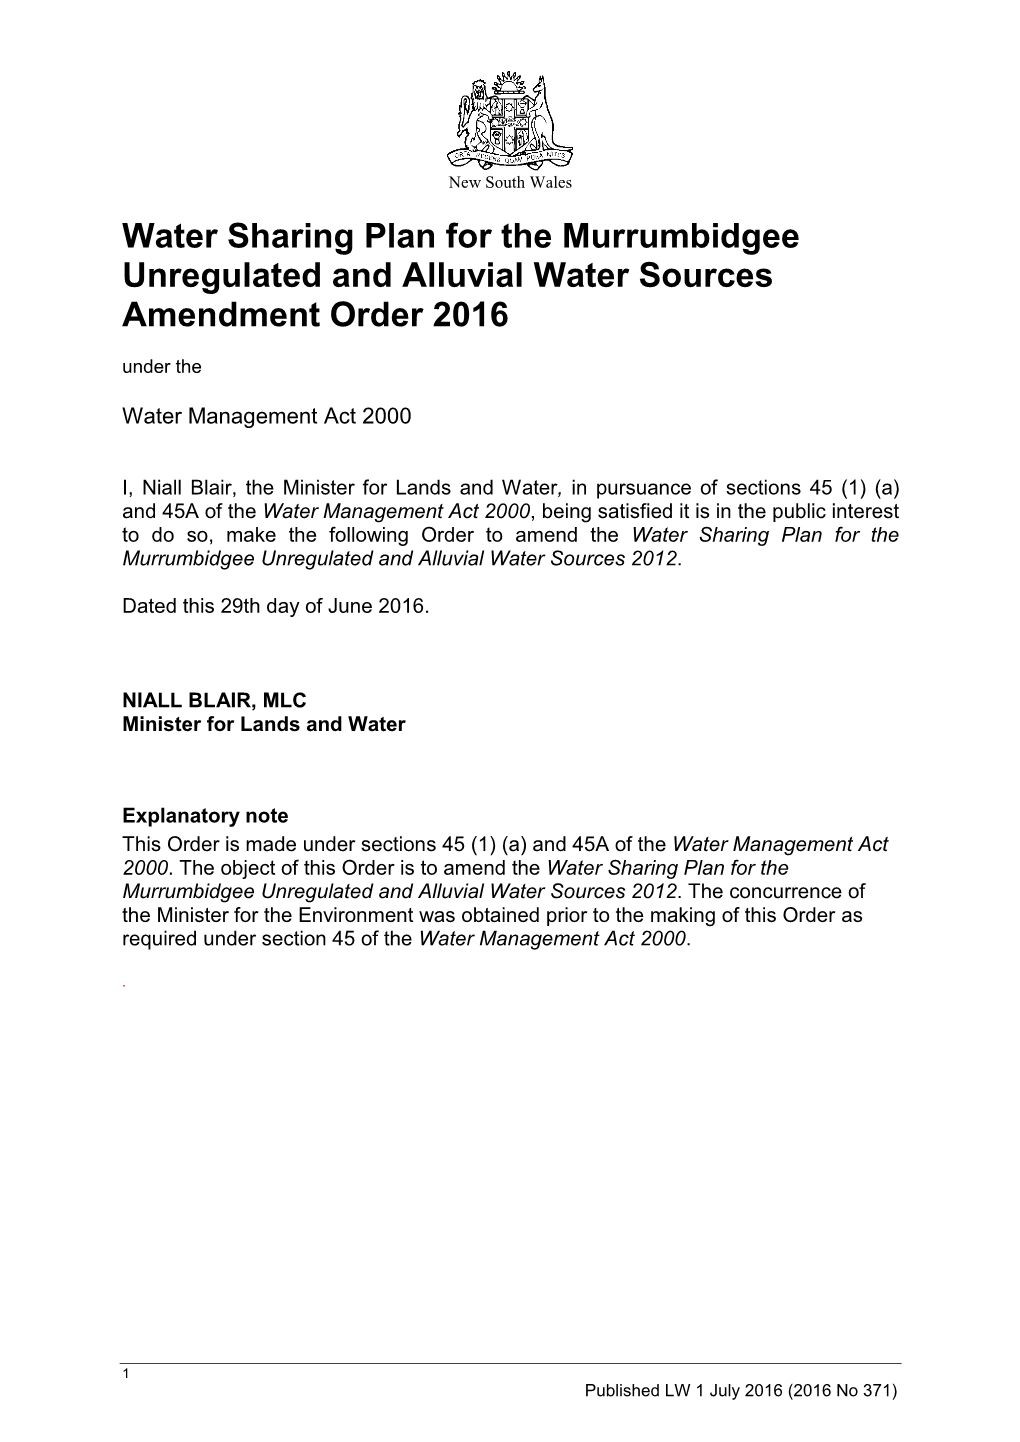 Water Sharing Plan for the Murrumbidgee Unregulated and Alluvial Water Sources Amendment Order 2016 Under The